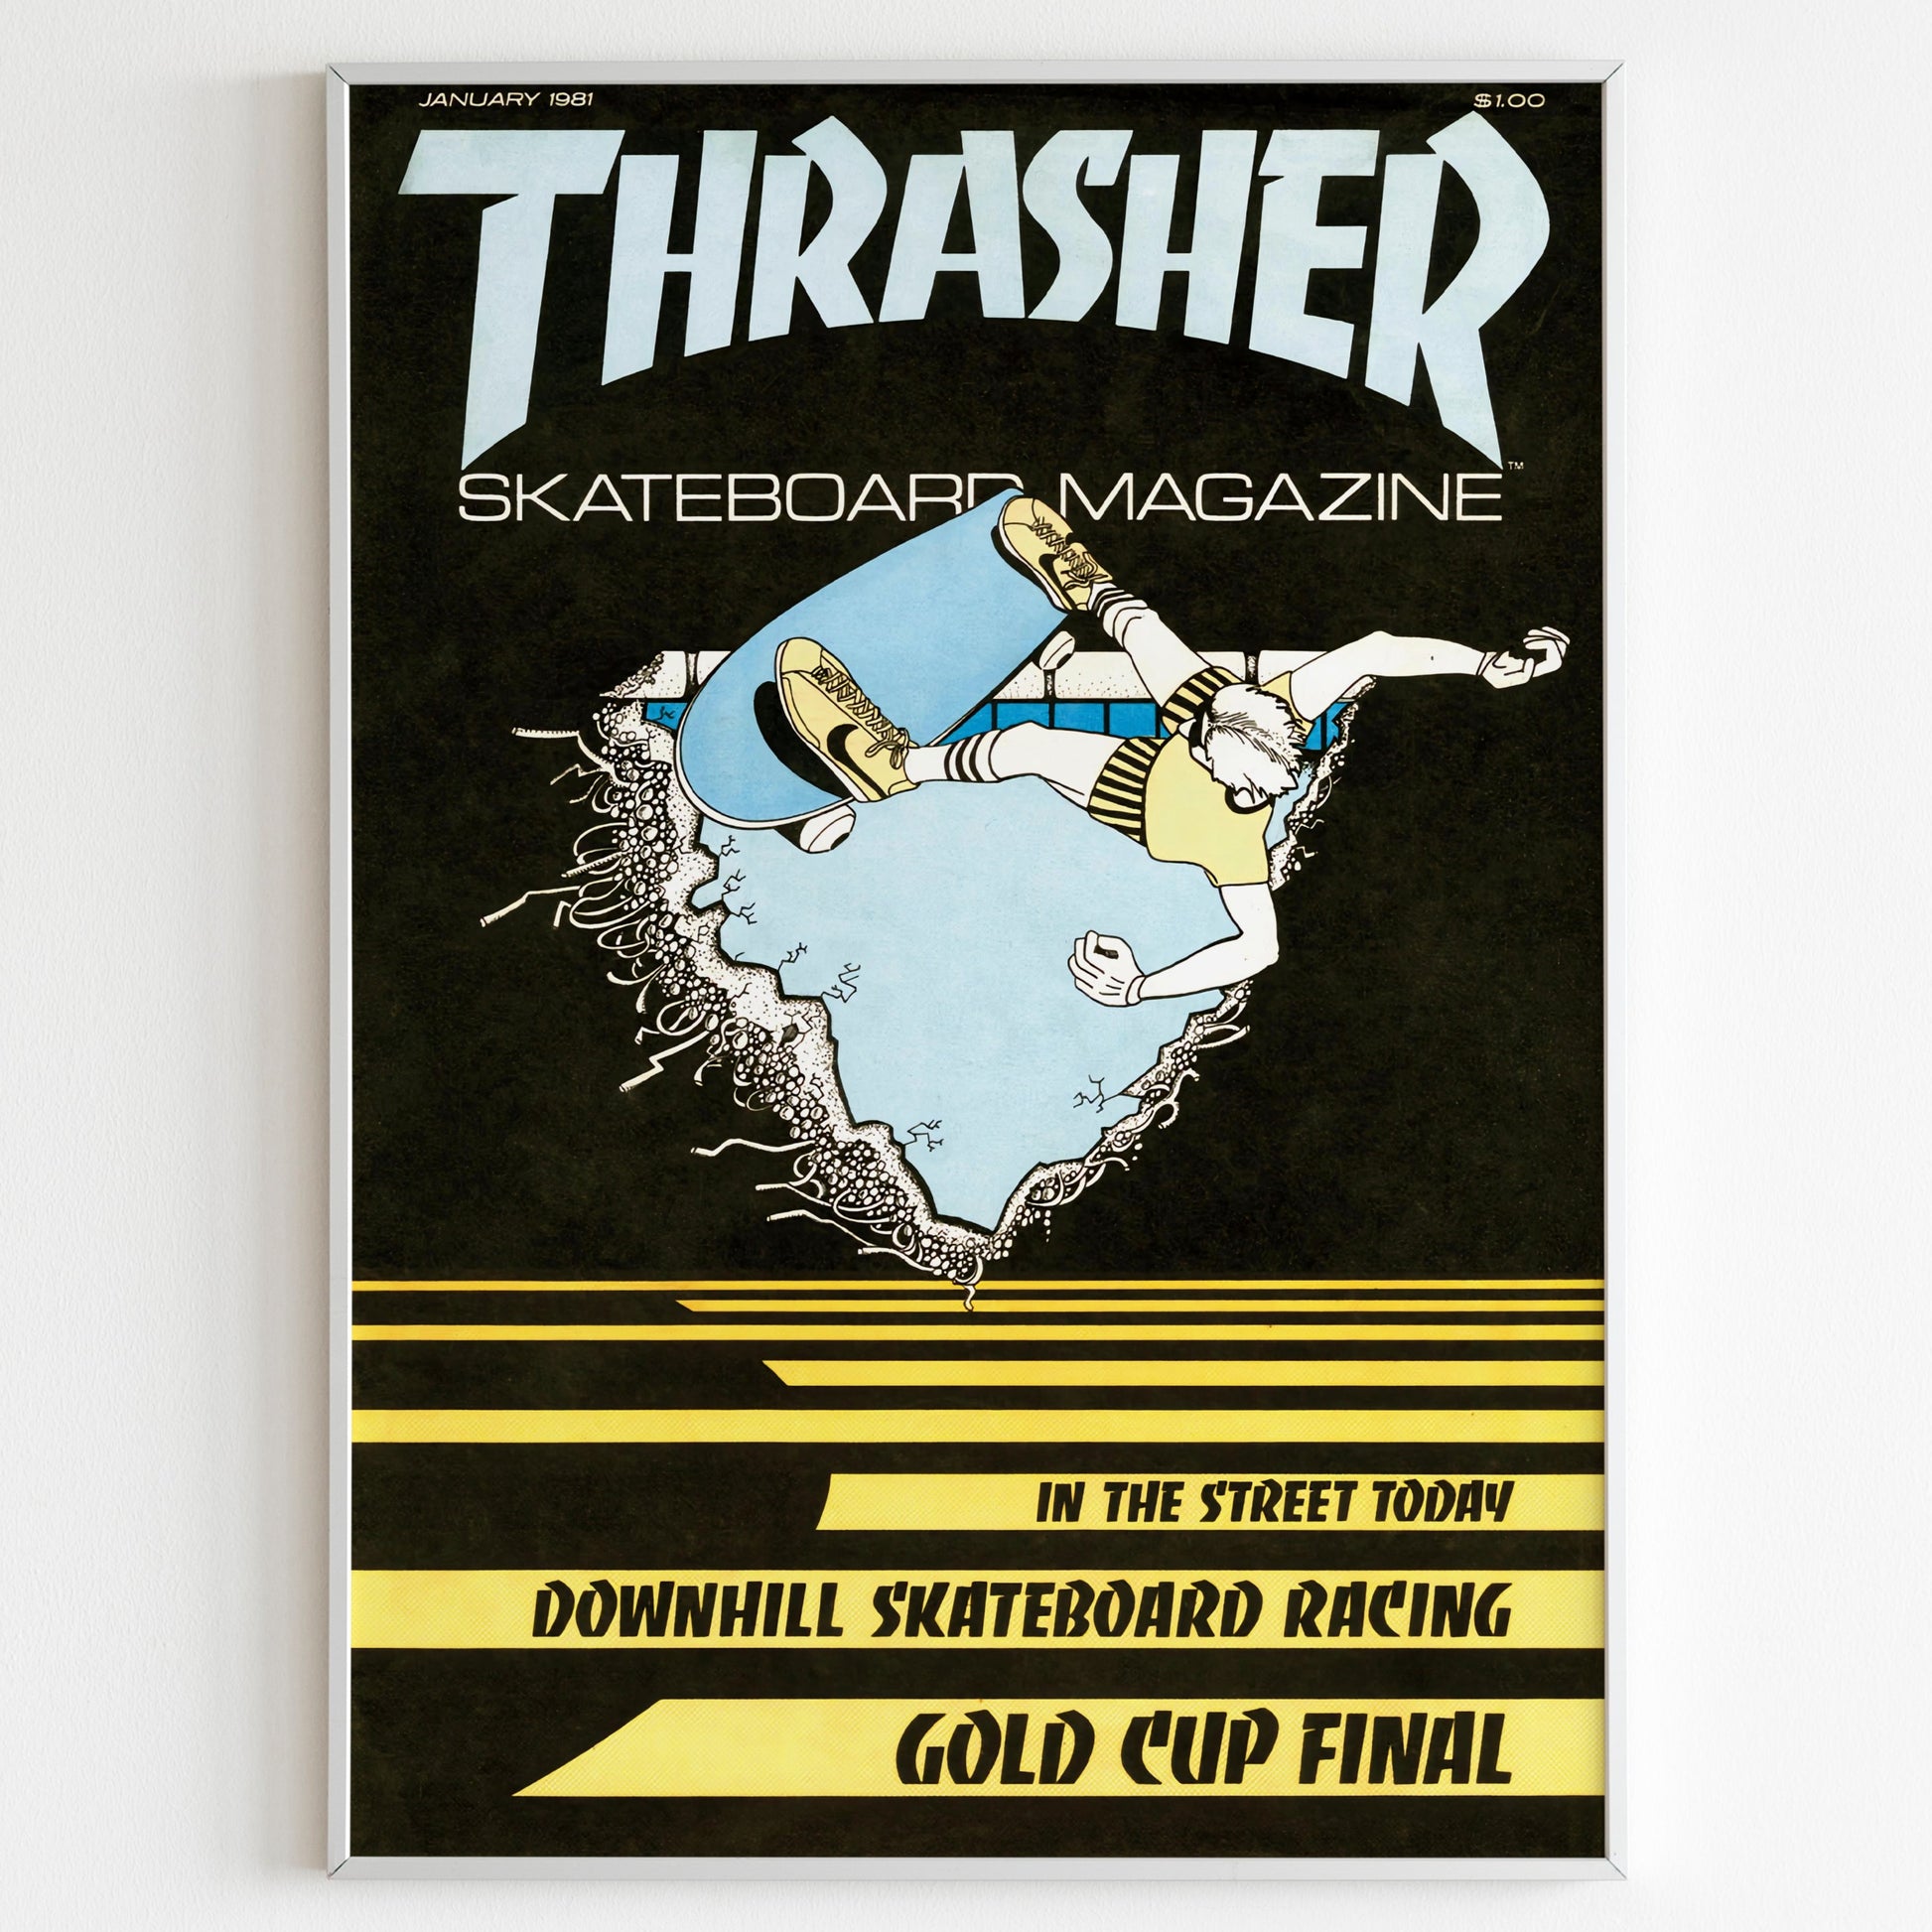 Thrasher Skateboarding 1981 January Front Cover Poster Advertising Poster, Skateboarding Style 80s Print, Vintage Front Cover Ad Wall Art, 90s Skate Poster, Magazine Retro Advertisement